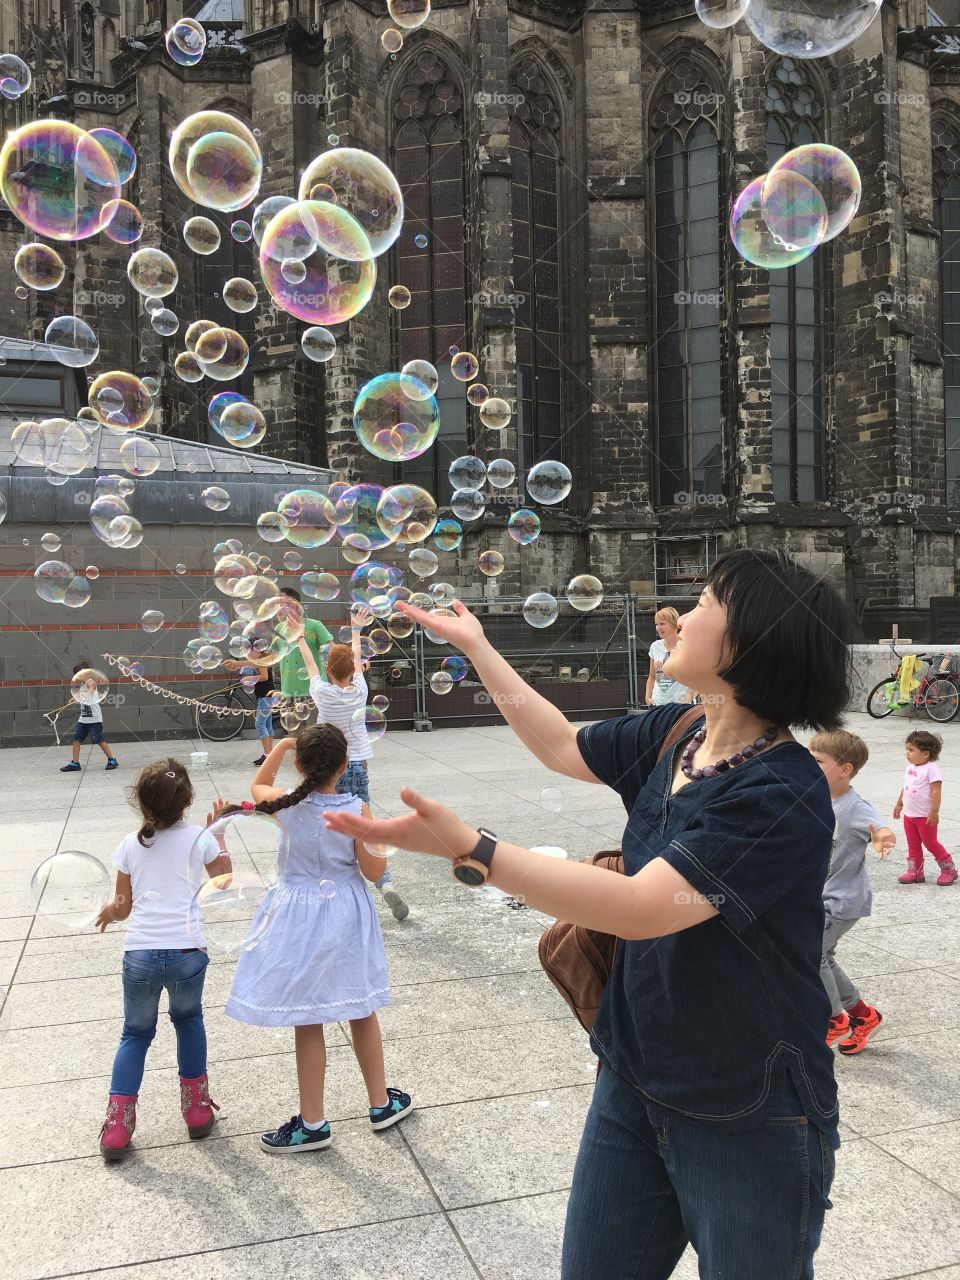 Playing bubbles like a child